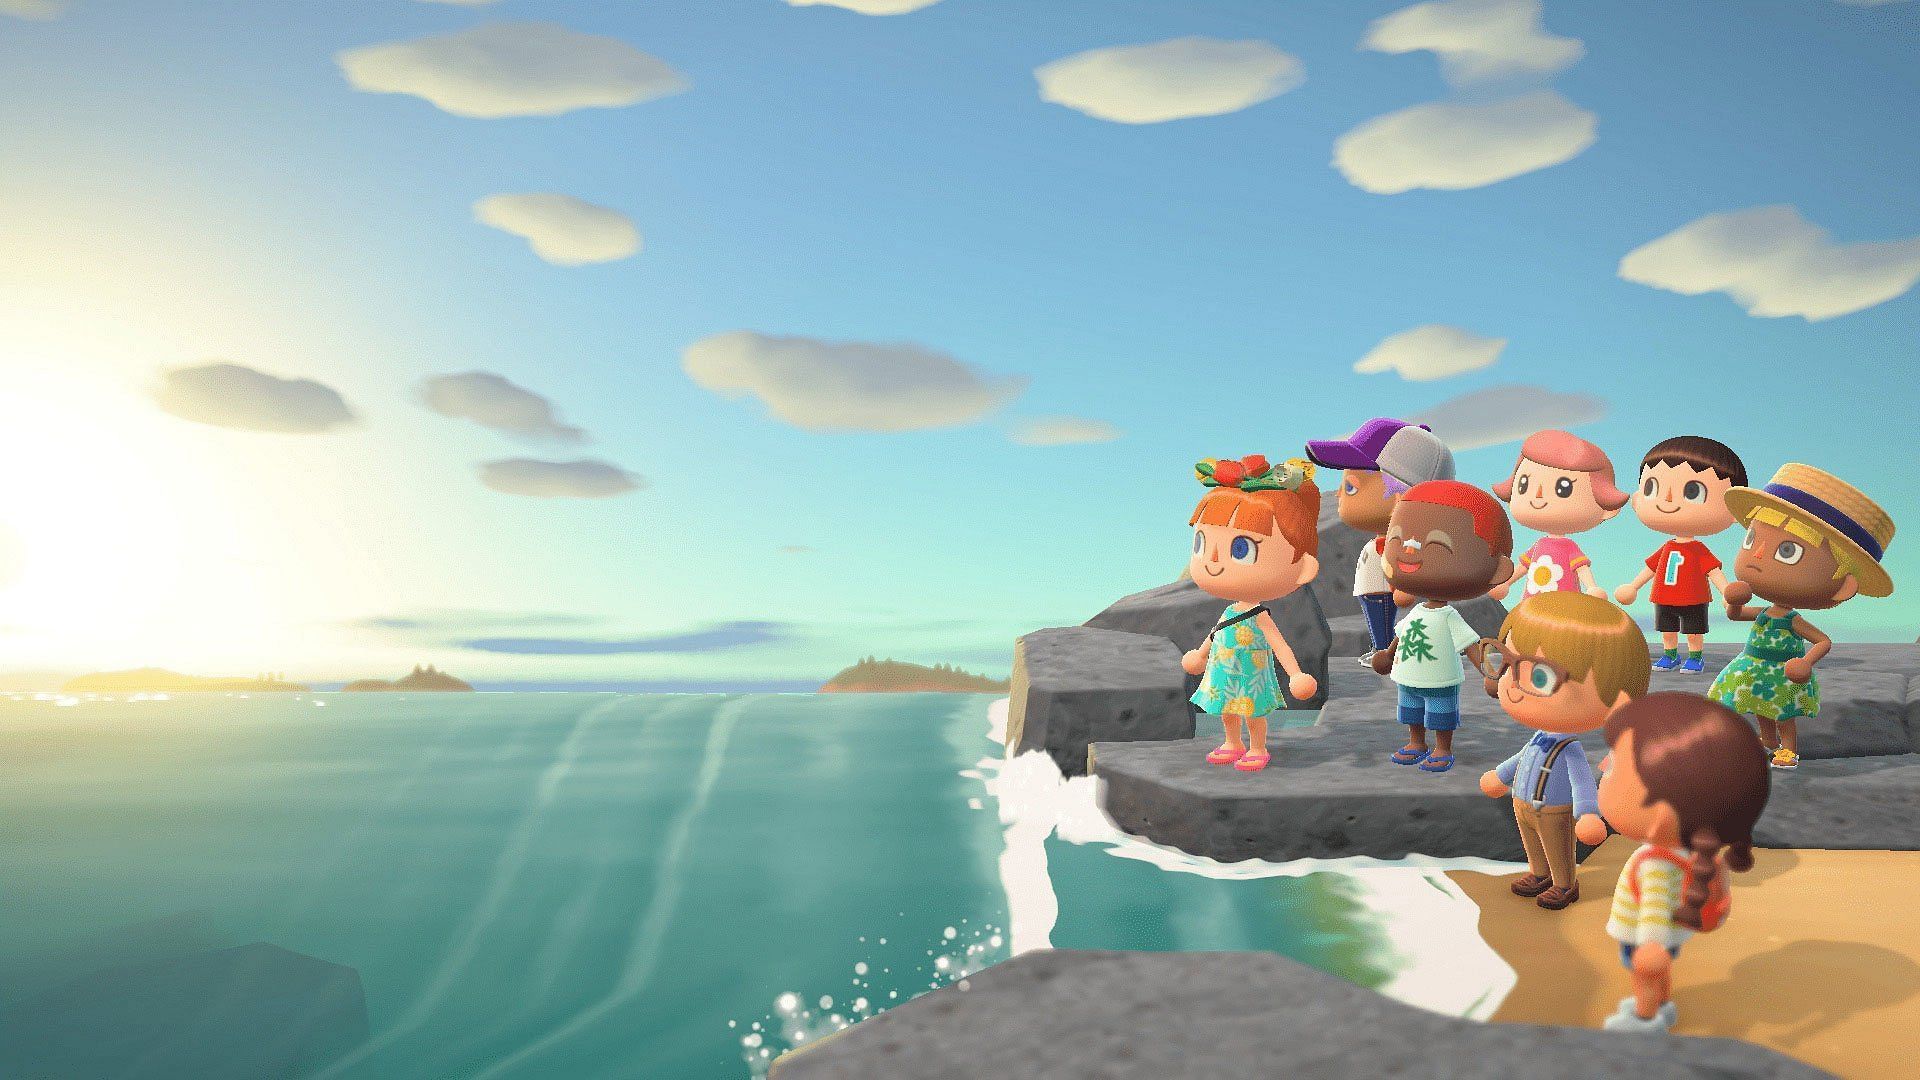 Private island? Check! making friends and peace? Double check! (Image via Nintento EPD)